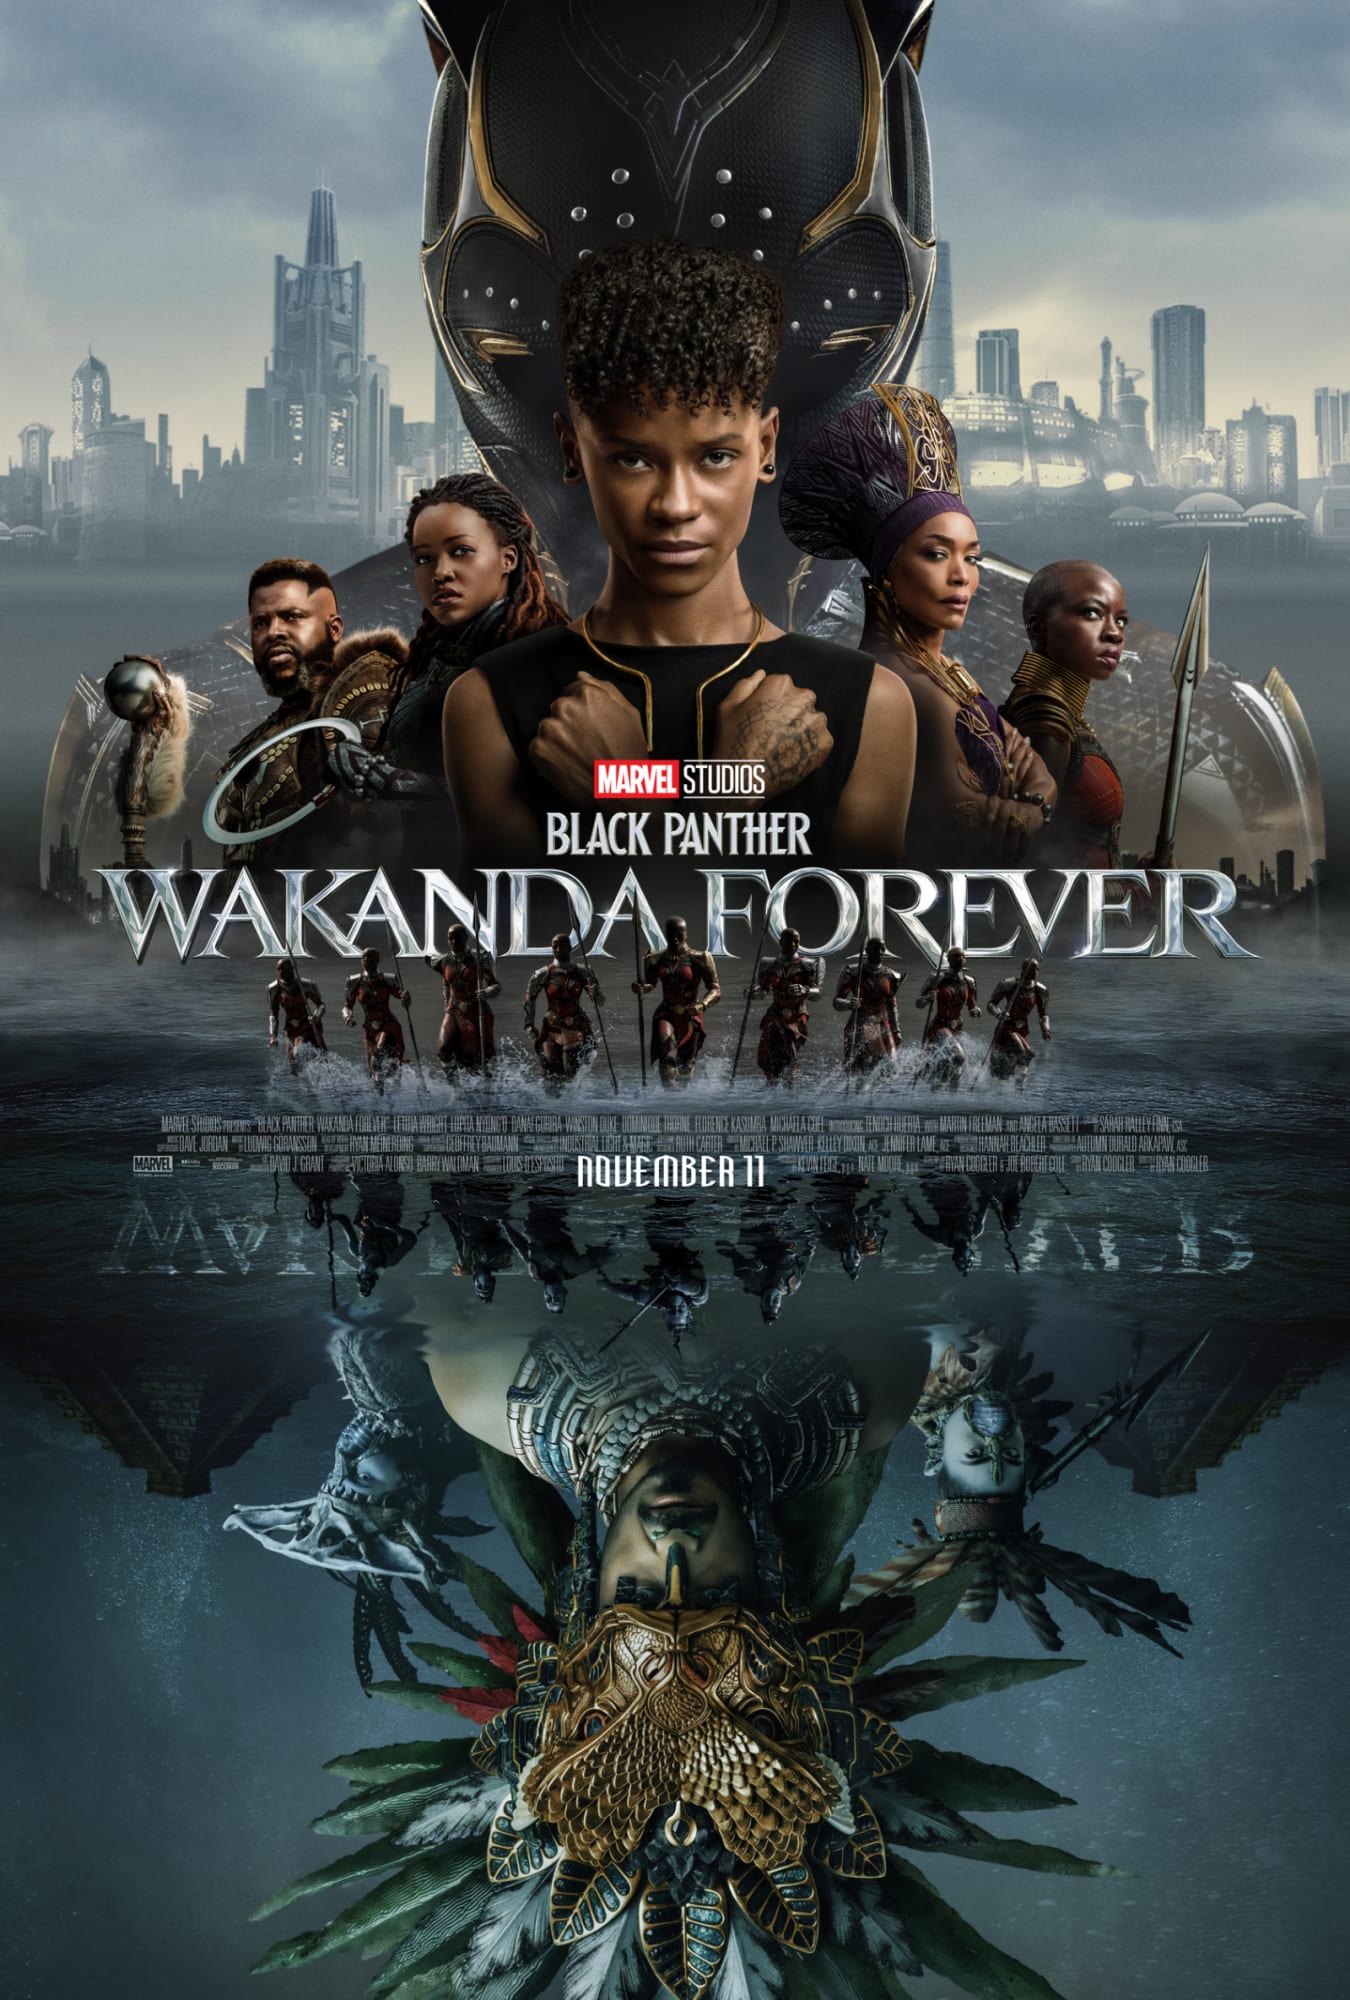 Black Panther: Wakanda Forever spoiler-packed review: A spectacular and